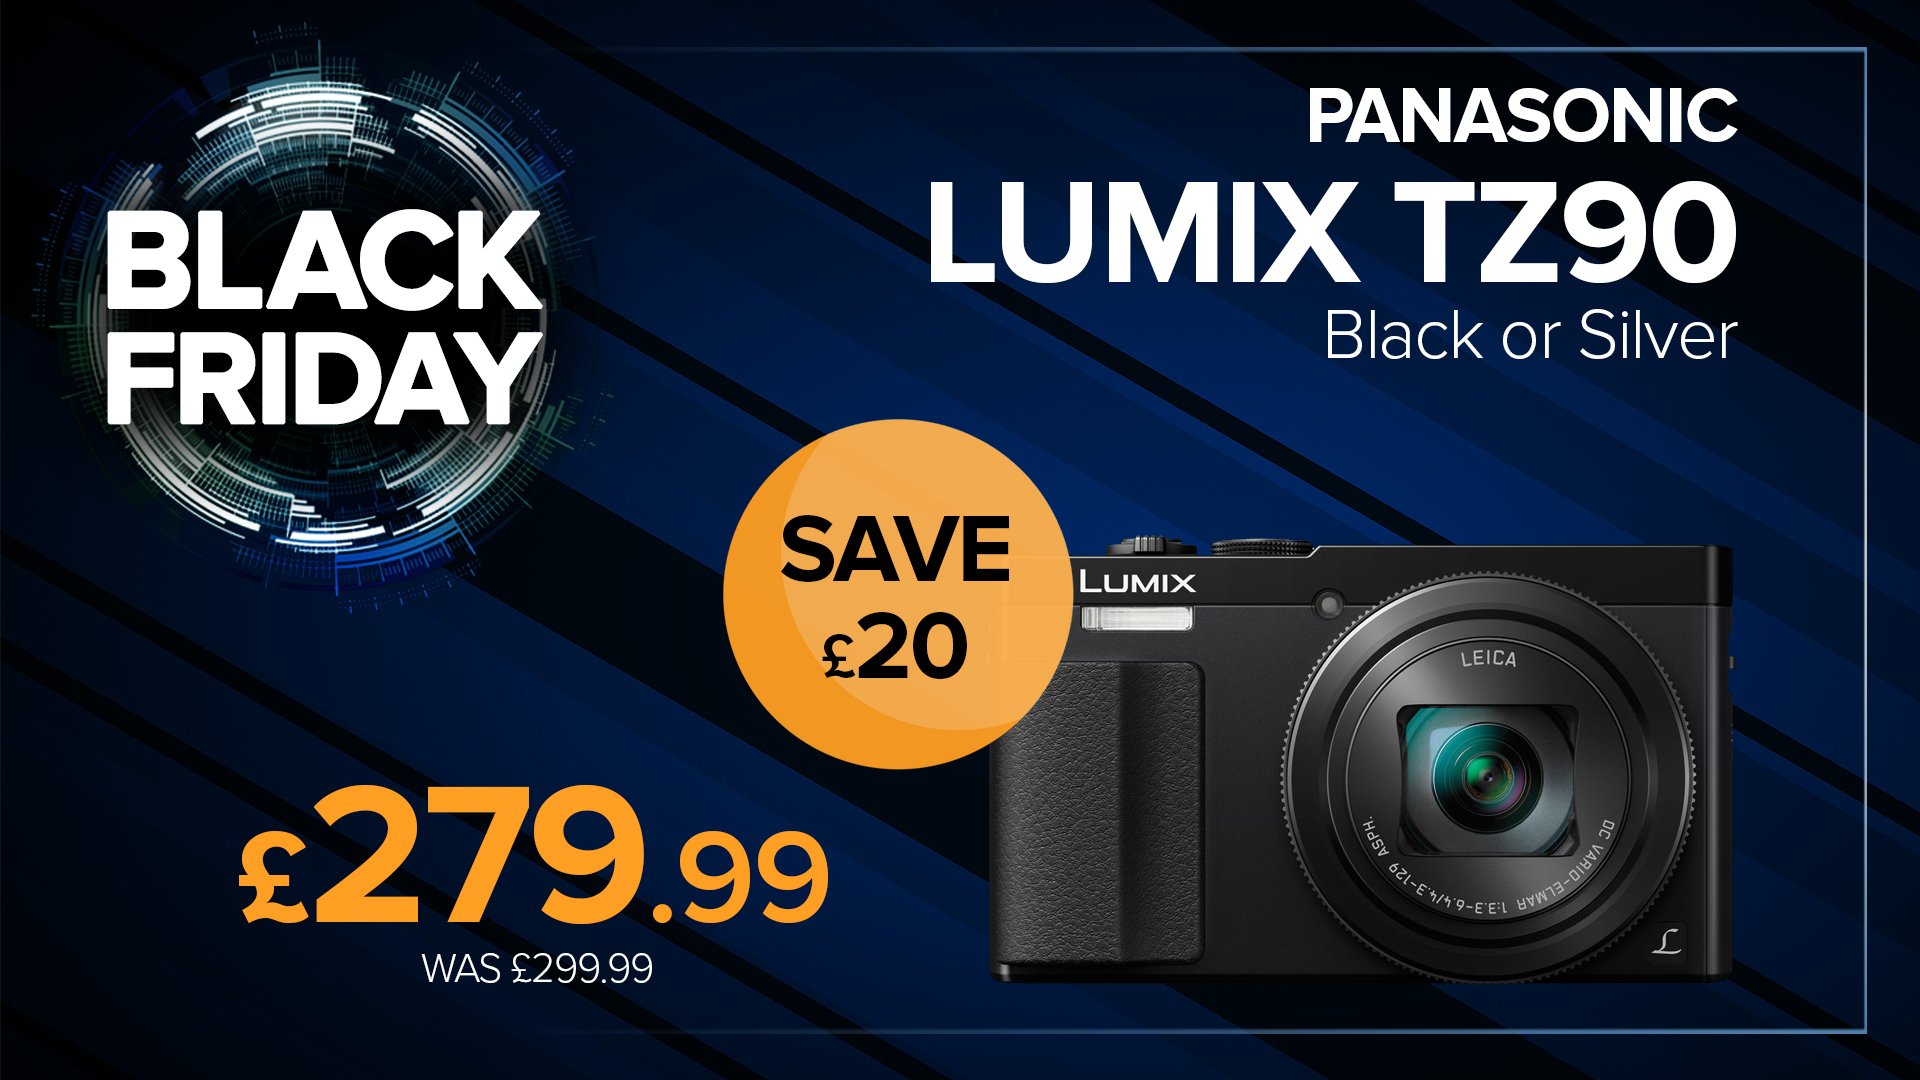 LondonCameraExchange Twitter: "SAVE £20 on the Panasonic Lumix TZ90 with it's 30x Leica optical zoom and compact pocketable design, available black or silver - in-store &amp; online now! Find